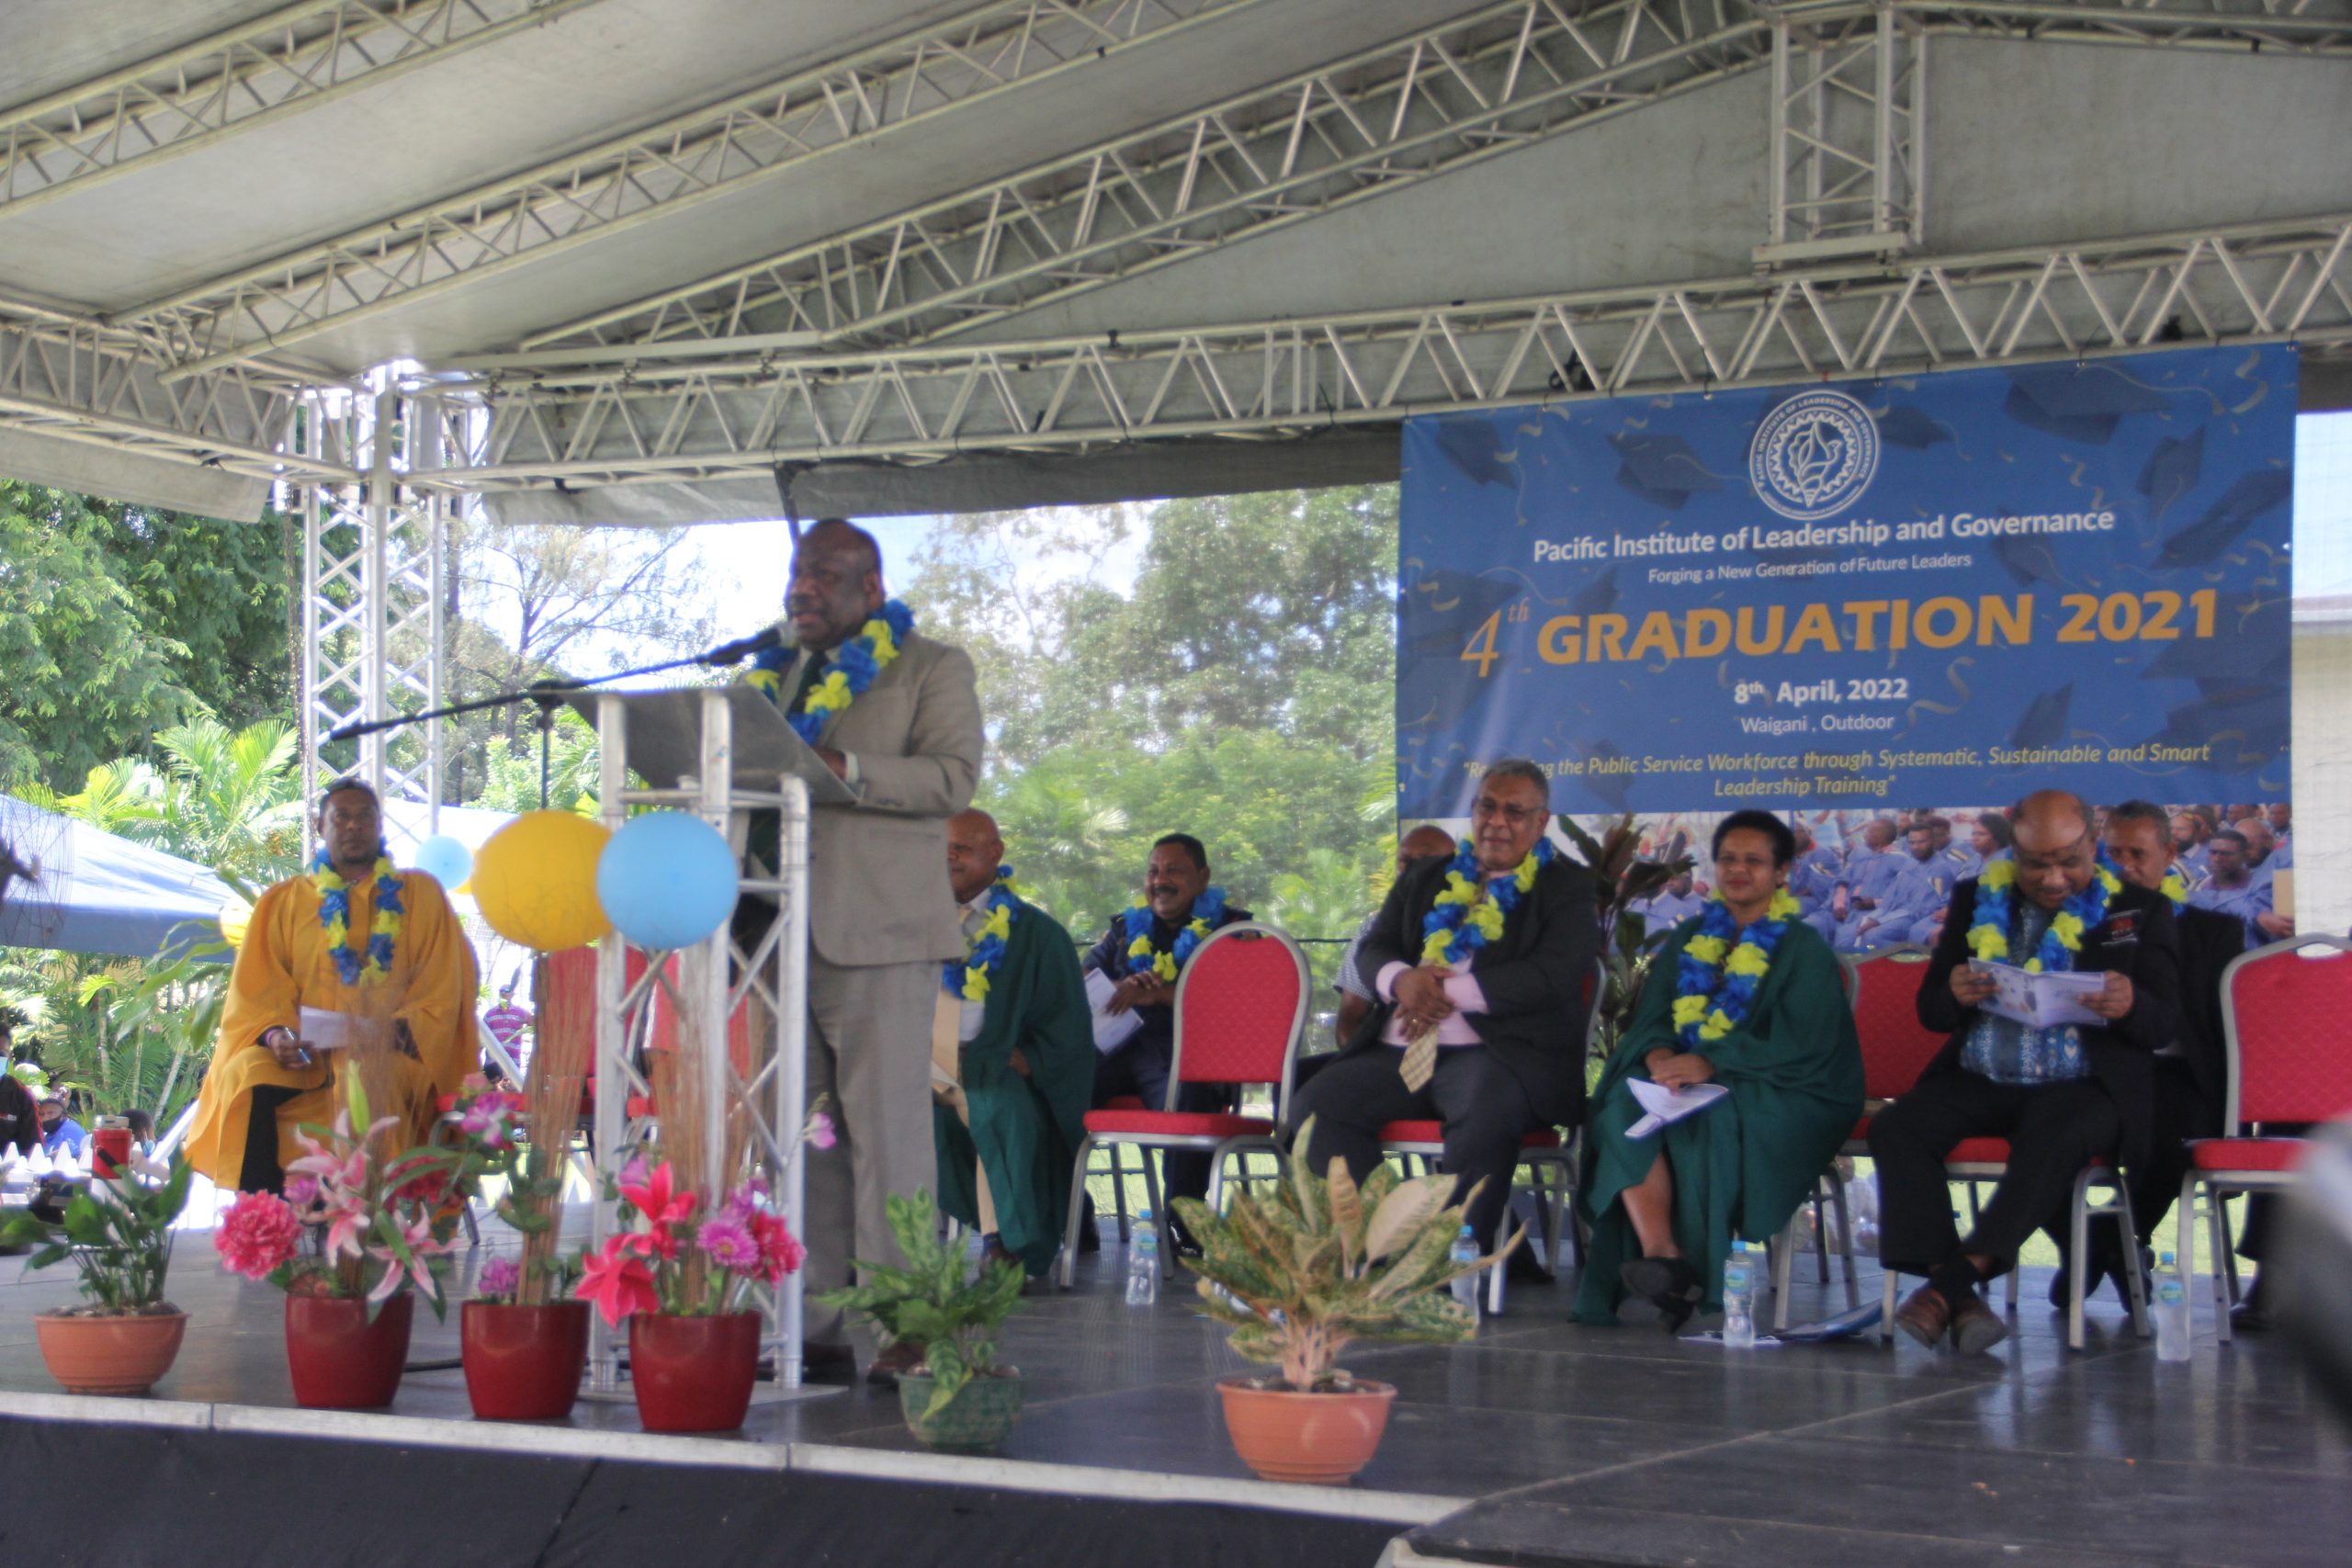 You are currently viewing PILAG & UN Women Graduation 8th April